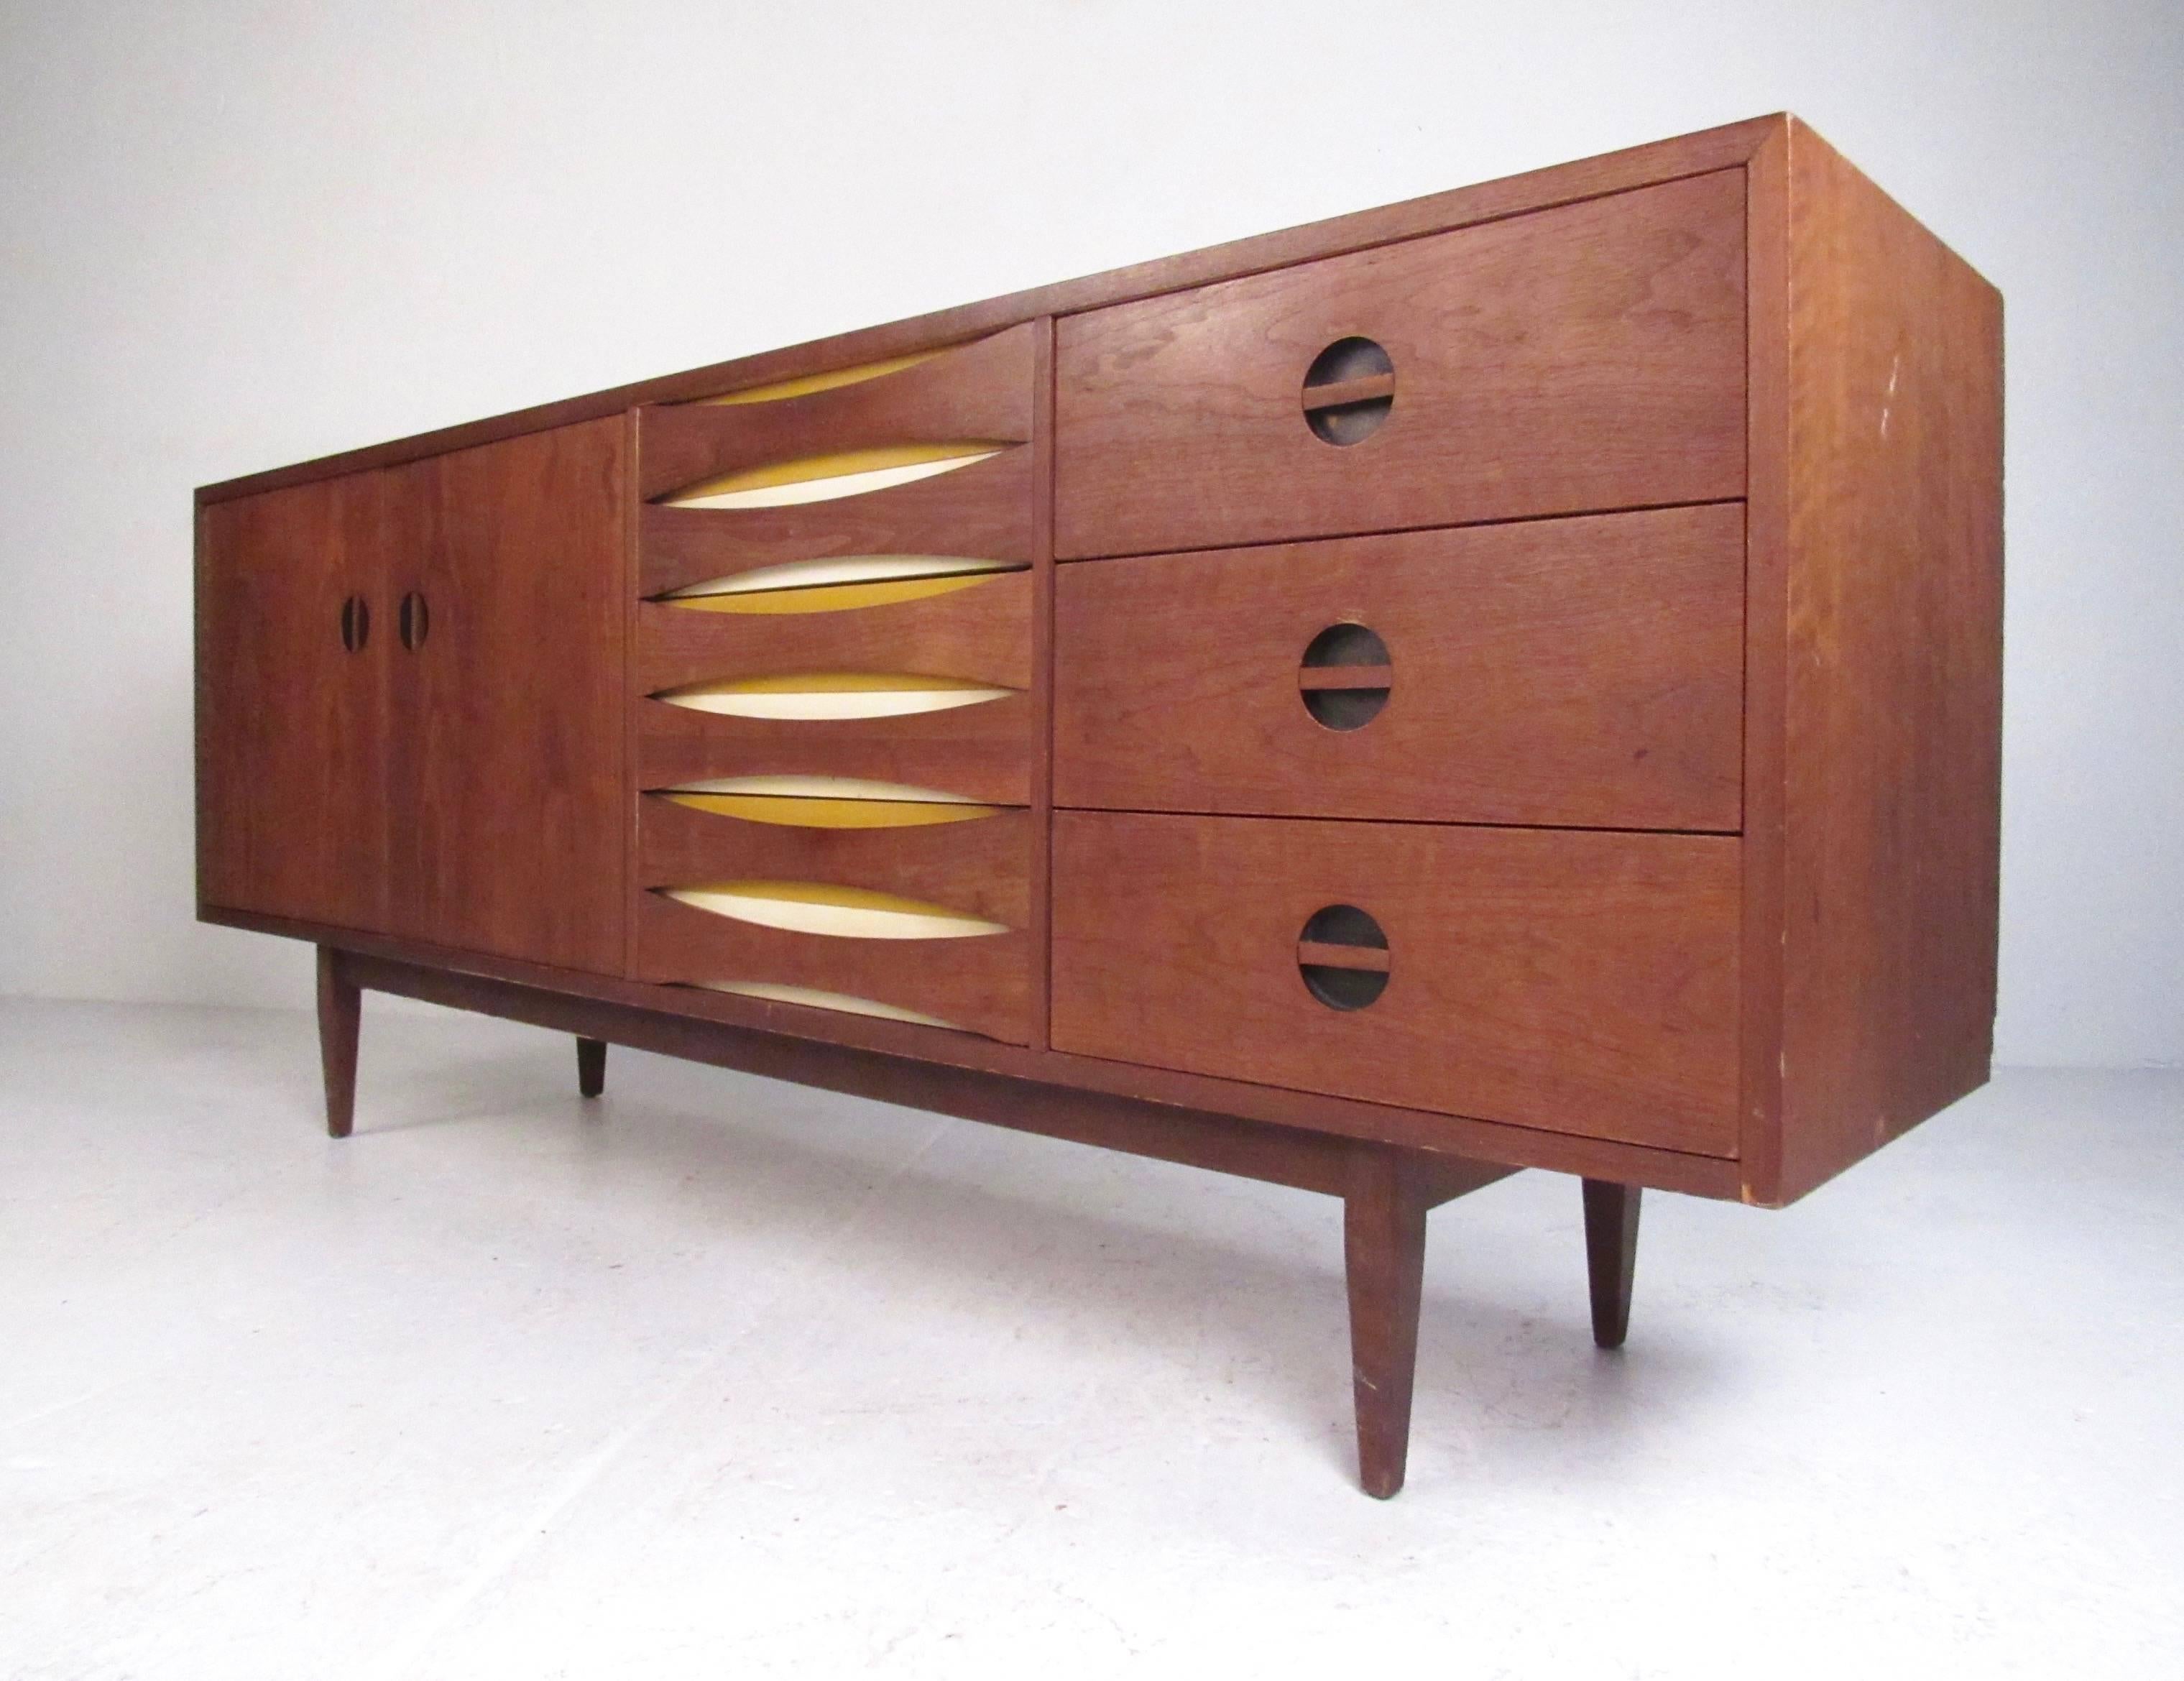 This beautiful Mid-Century Modern sideboard has a unique vintage walnut finish, stylish drawer pulls, and tapered hardwood legs. This impressive modern credenza combines side by side drawer and cabinet storage and makes for a versatile and